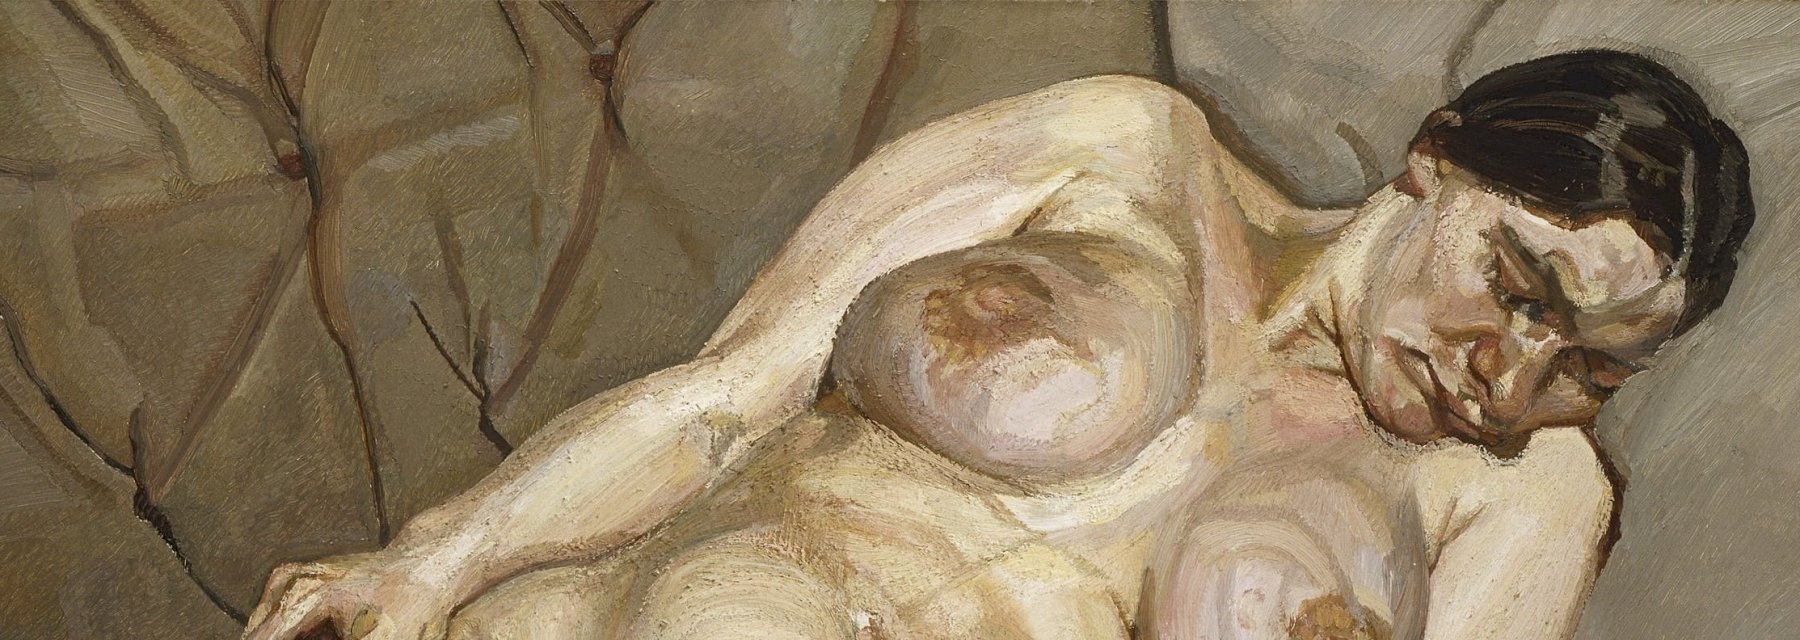 An interview with curator Daniel F. Herrmann on Lucian Freud: New Perspectives